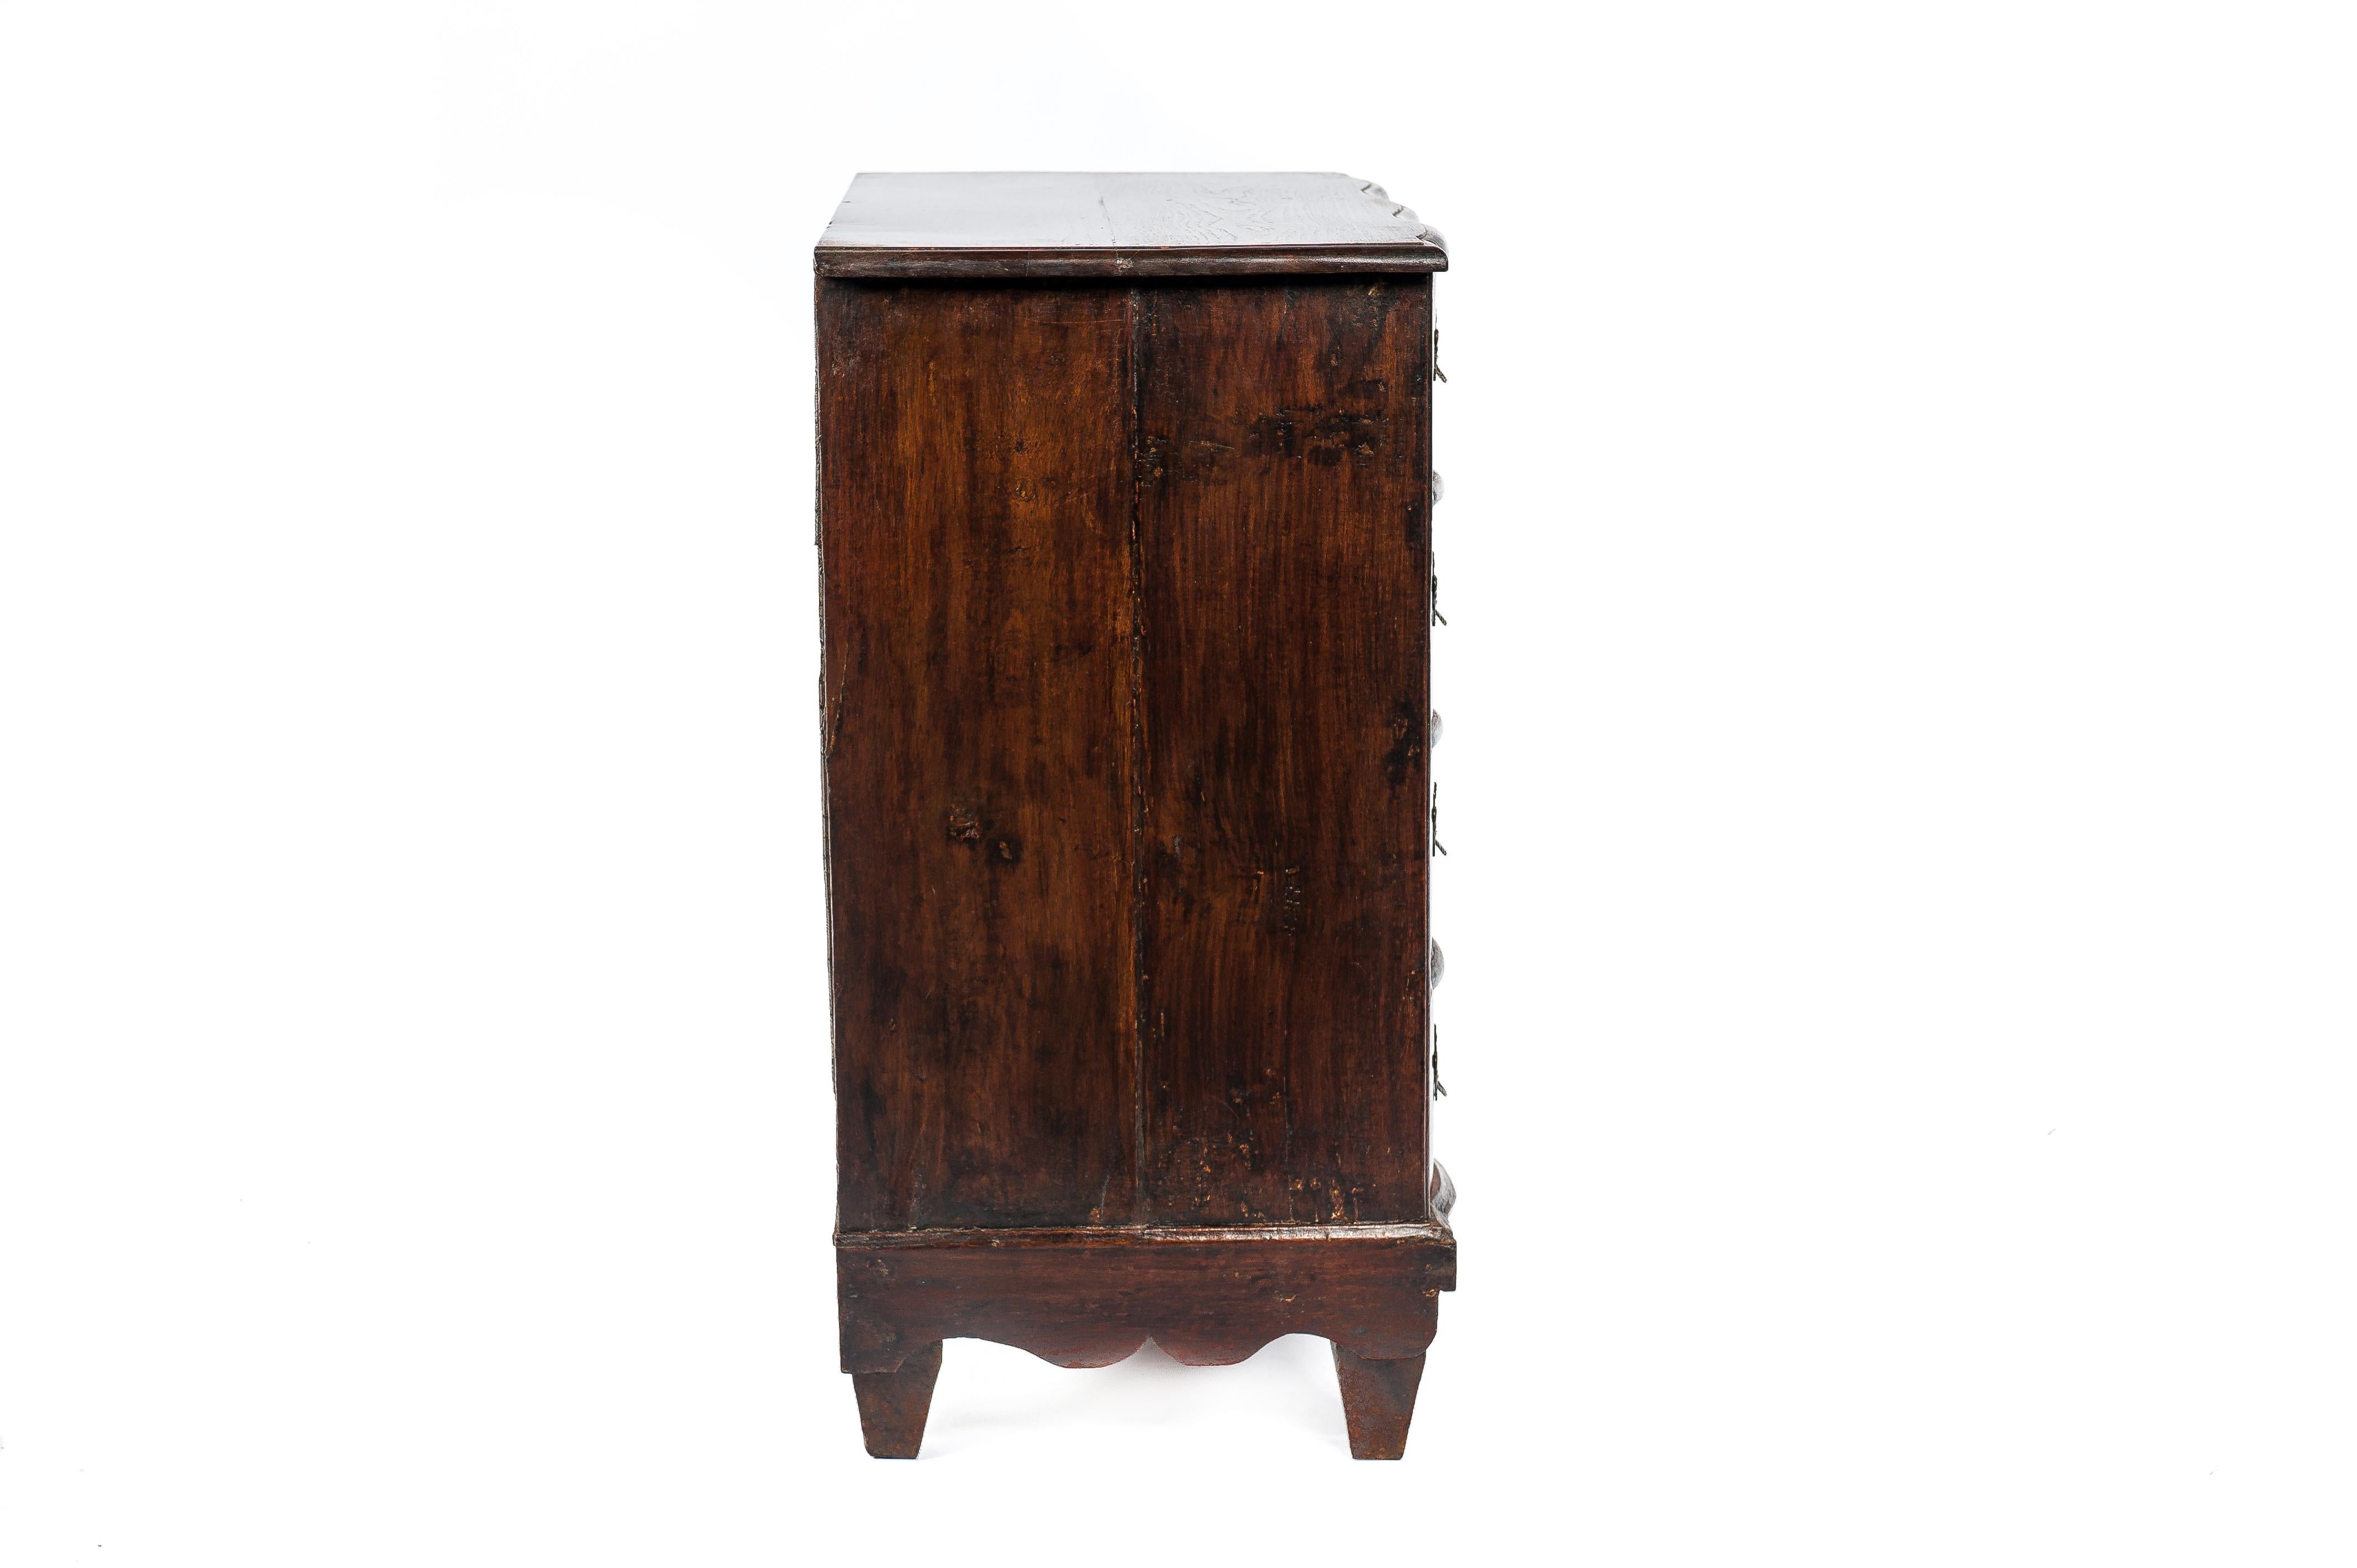 Polished Antique 19th Century Dutch Empire Warm Brown Curved Commode in Solid Elm For Sale